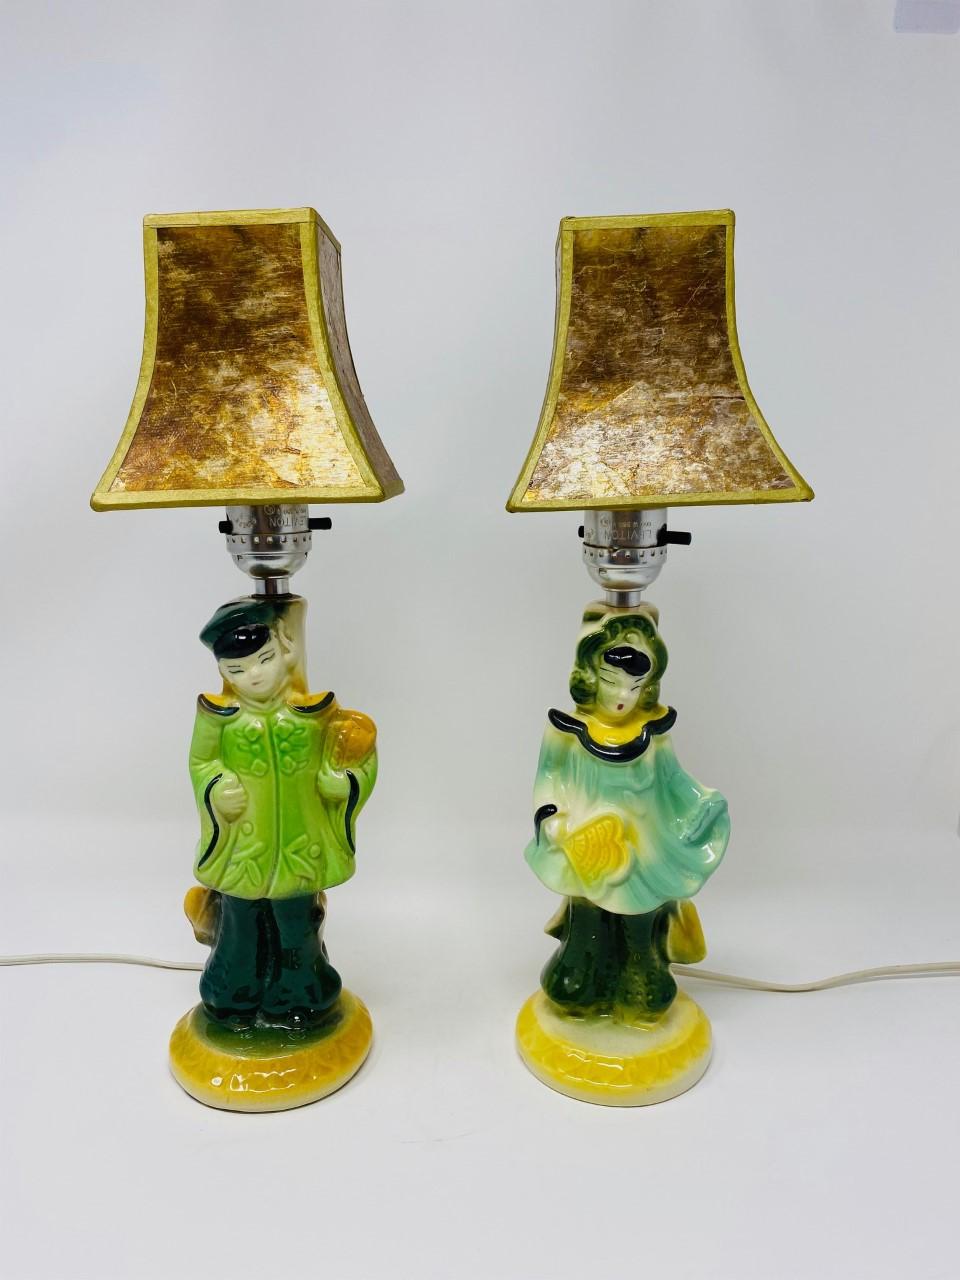 Beautifully charming set of chinoiserie table lamps. This set consists of two vintage lamps (1950’s) figuratively evoking a male and a female figure each. The ceramic sculptures delightfully present colors in a variety of greens and yellows with